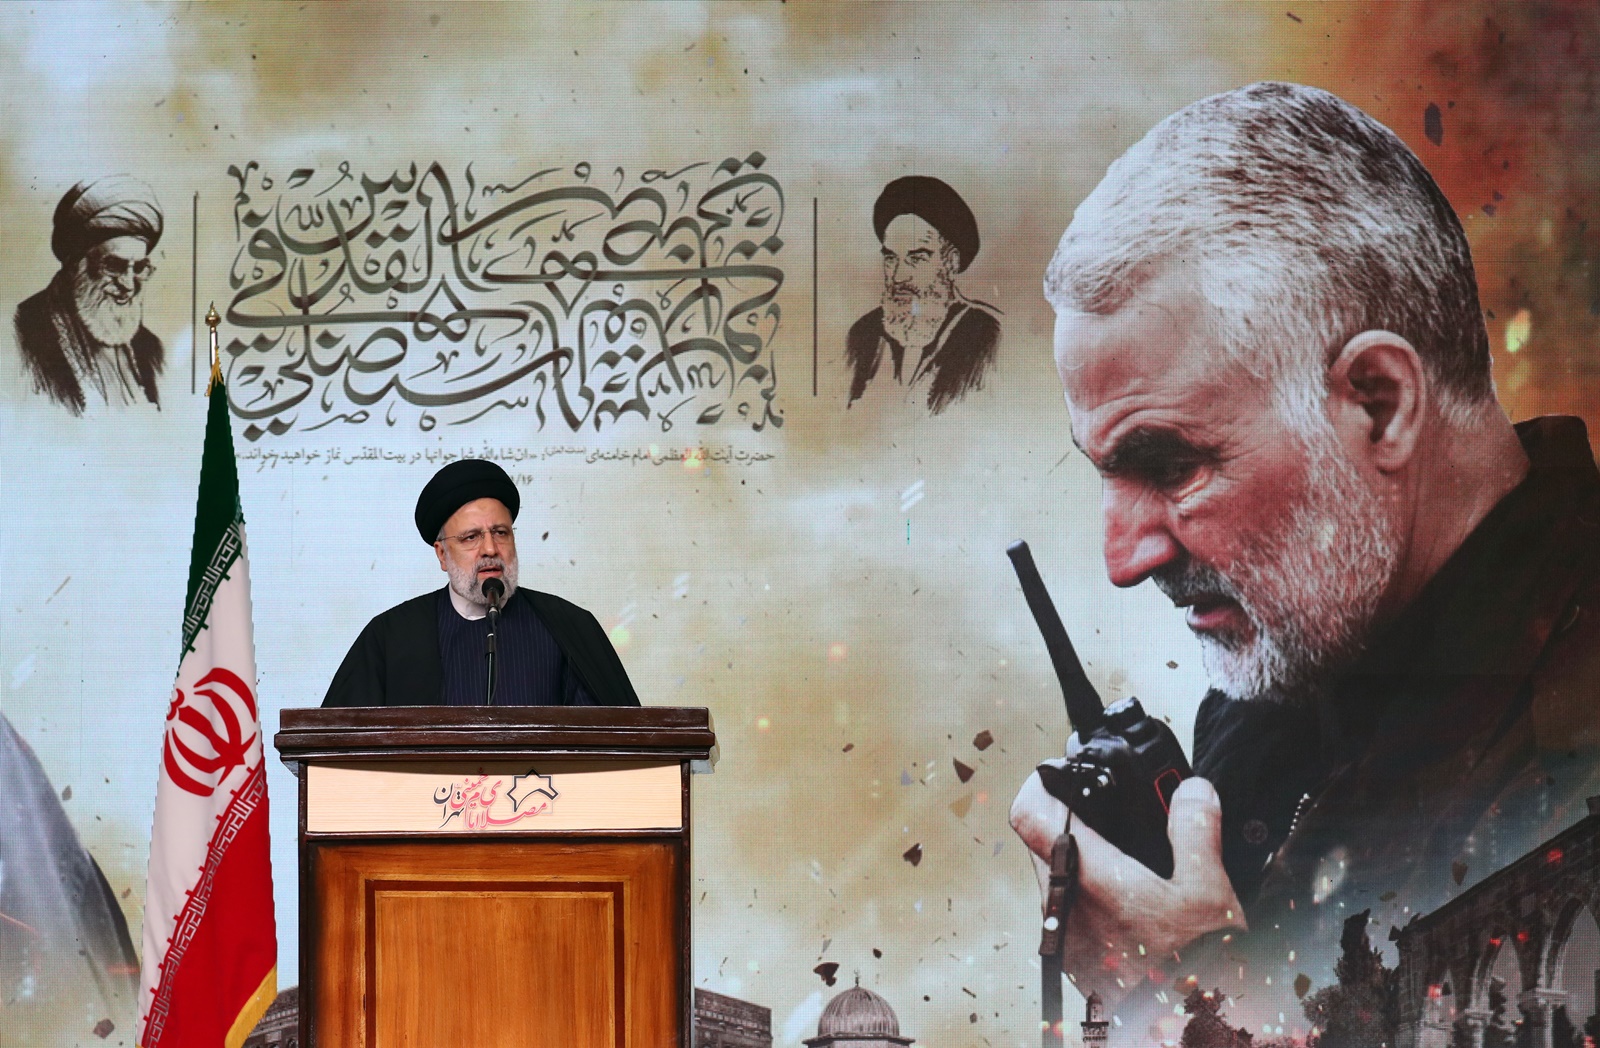 epa11055605 Iranian president Ebrahim Raisi speaks to the crowd in front of an image of the late Iran's Islamic Revolutionary Guard Corps (IRGC) Quds Force commander Qasem Soleimani during the fourth anniversary of his death, in Tehran, Iran, 03 January 2024. On the fourth anniversary of the assassination of Iranian General Qasem Soleimani, two explosions have killed at least 103 people and another 171 people were wounded near the mausoleum dedicated to him, according to Iranian state television. As part of a ceremony to honor General Soleimani, who was killed in a drone strike in neighboring Iraq in 2020, hundreds of people were on their way towards the grave on 03 January.  EPA/ABEDIN TAHERKENAREH  EPA-EFE/ABEDIN TAHERKENAREH